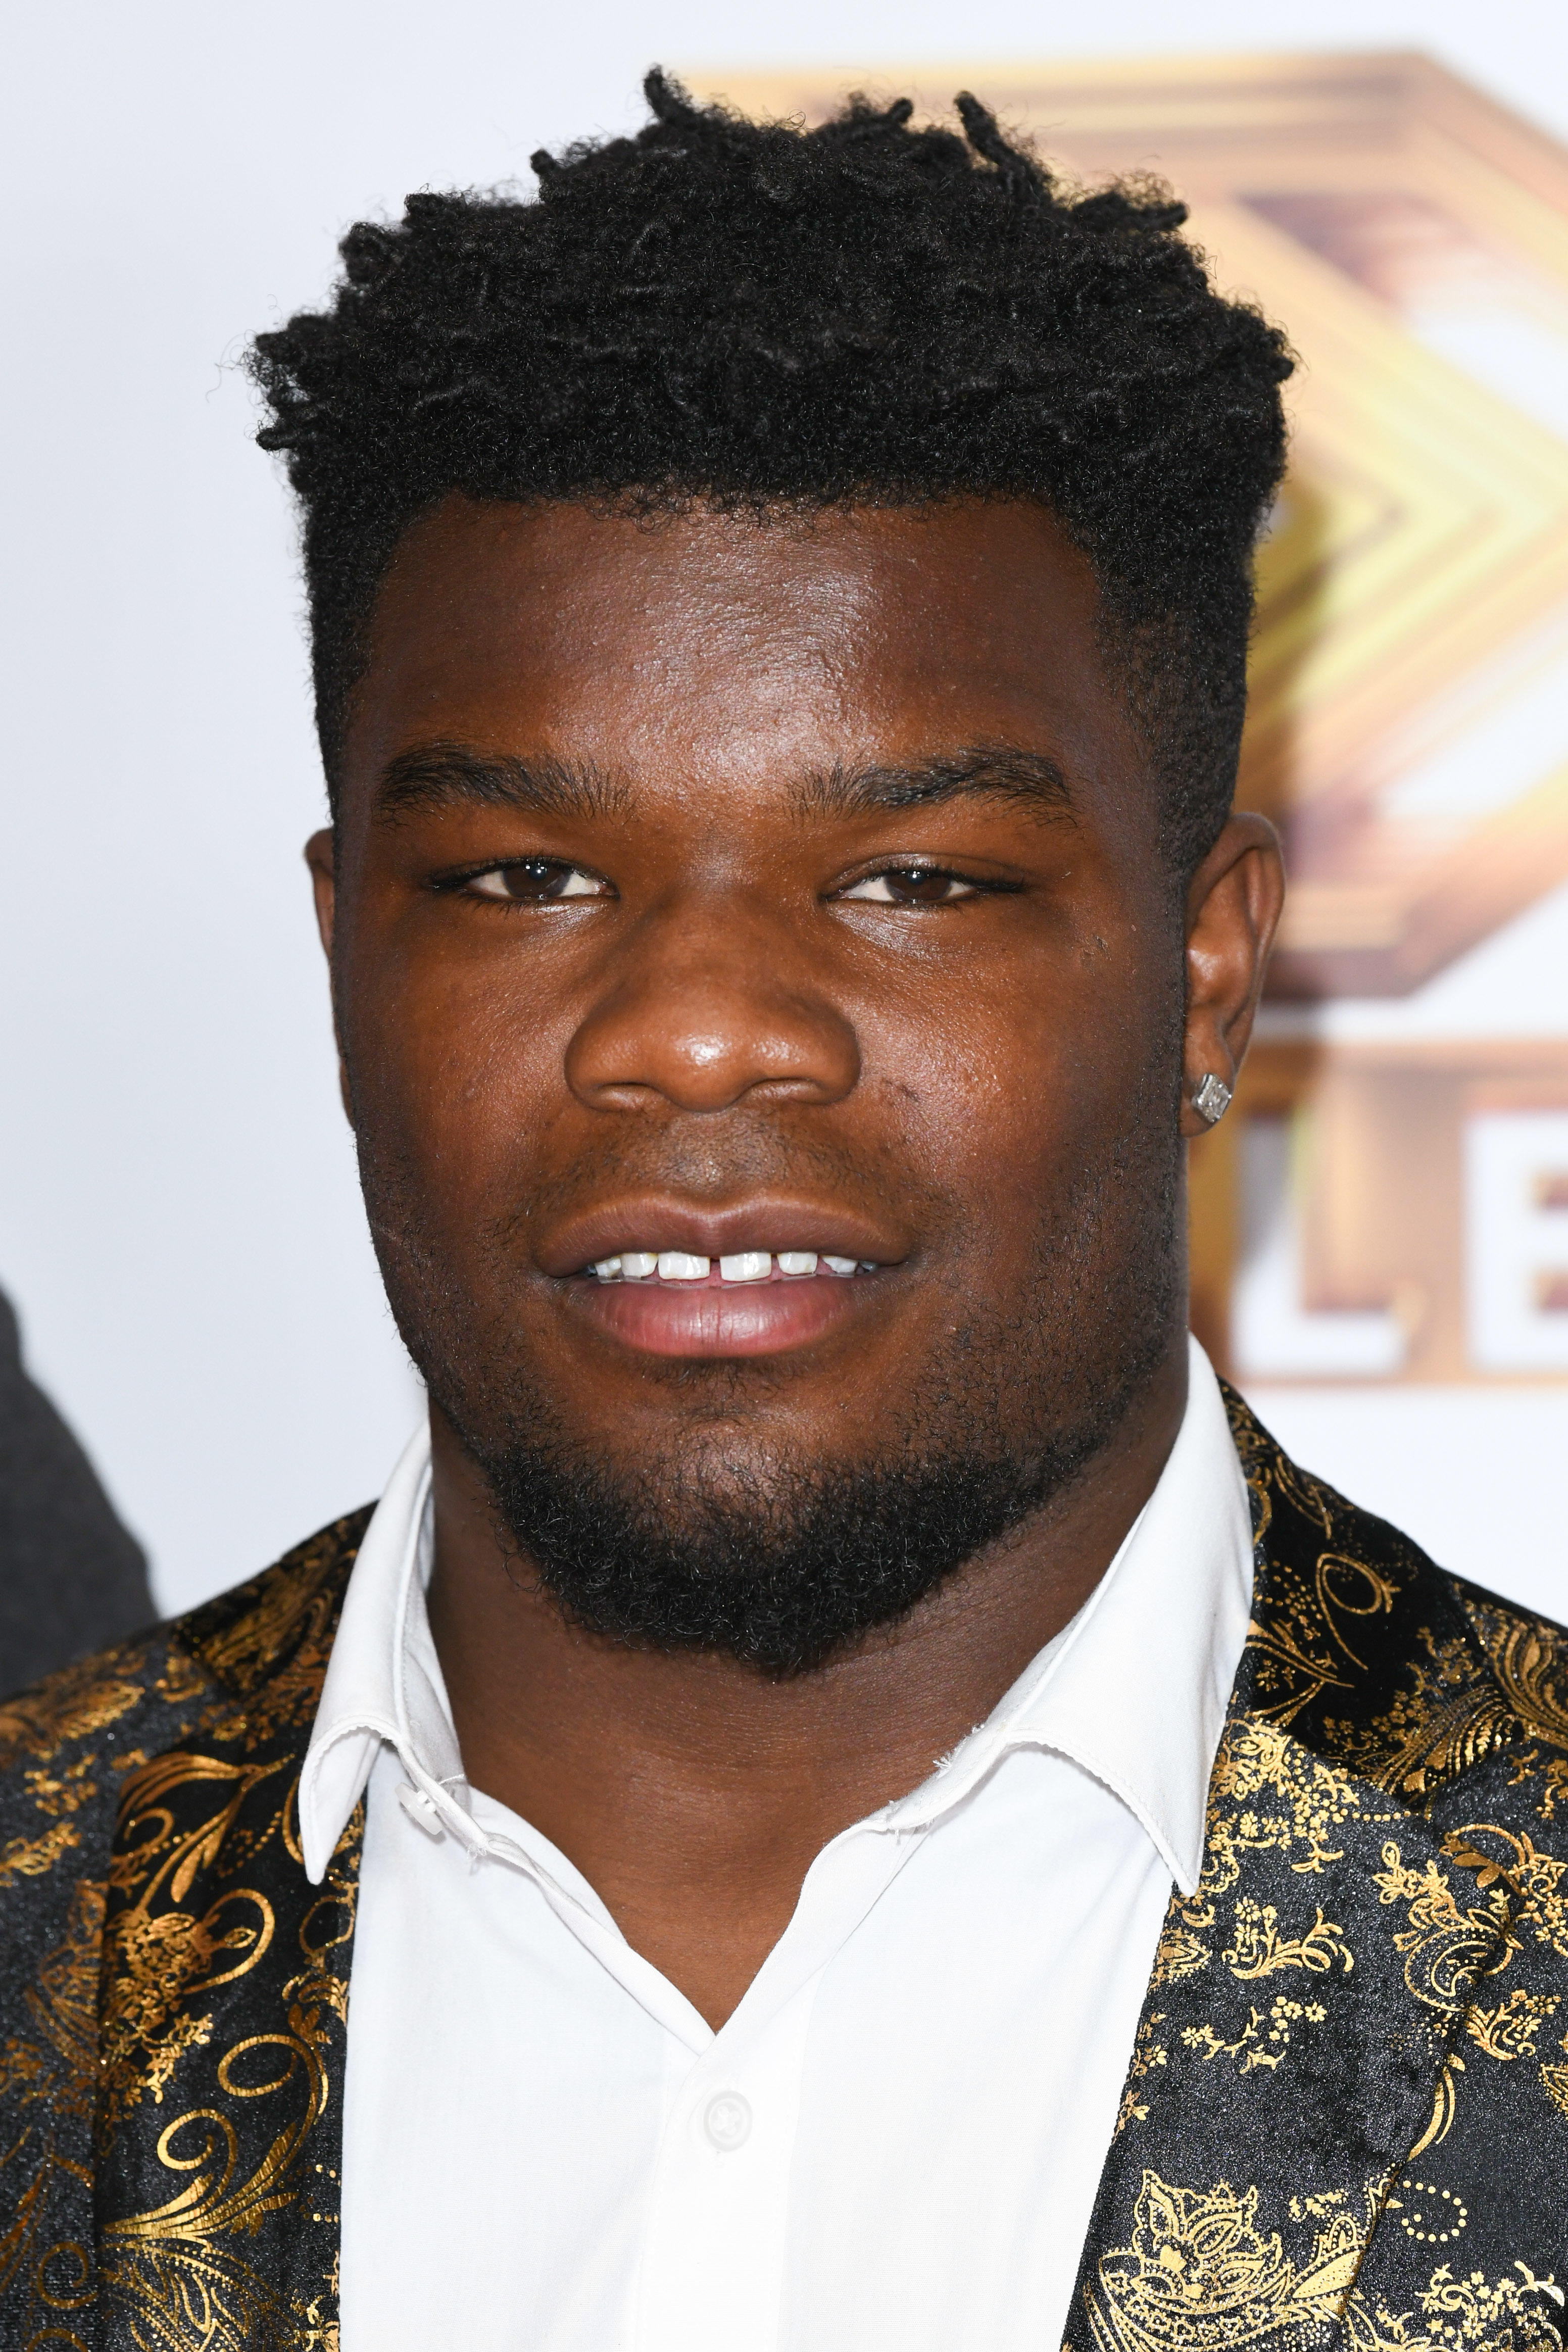 Missing X-Factor star Levi Davis hasn't used bank cards or phone for two weeks